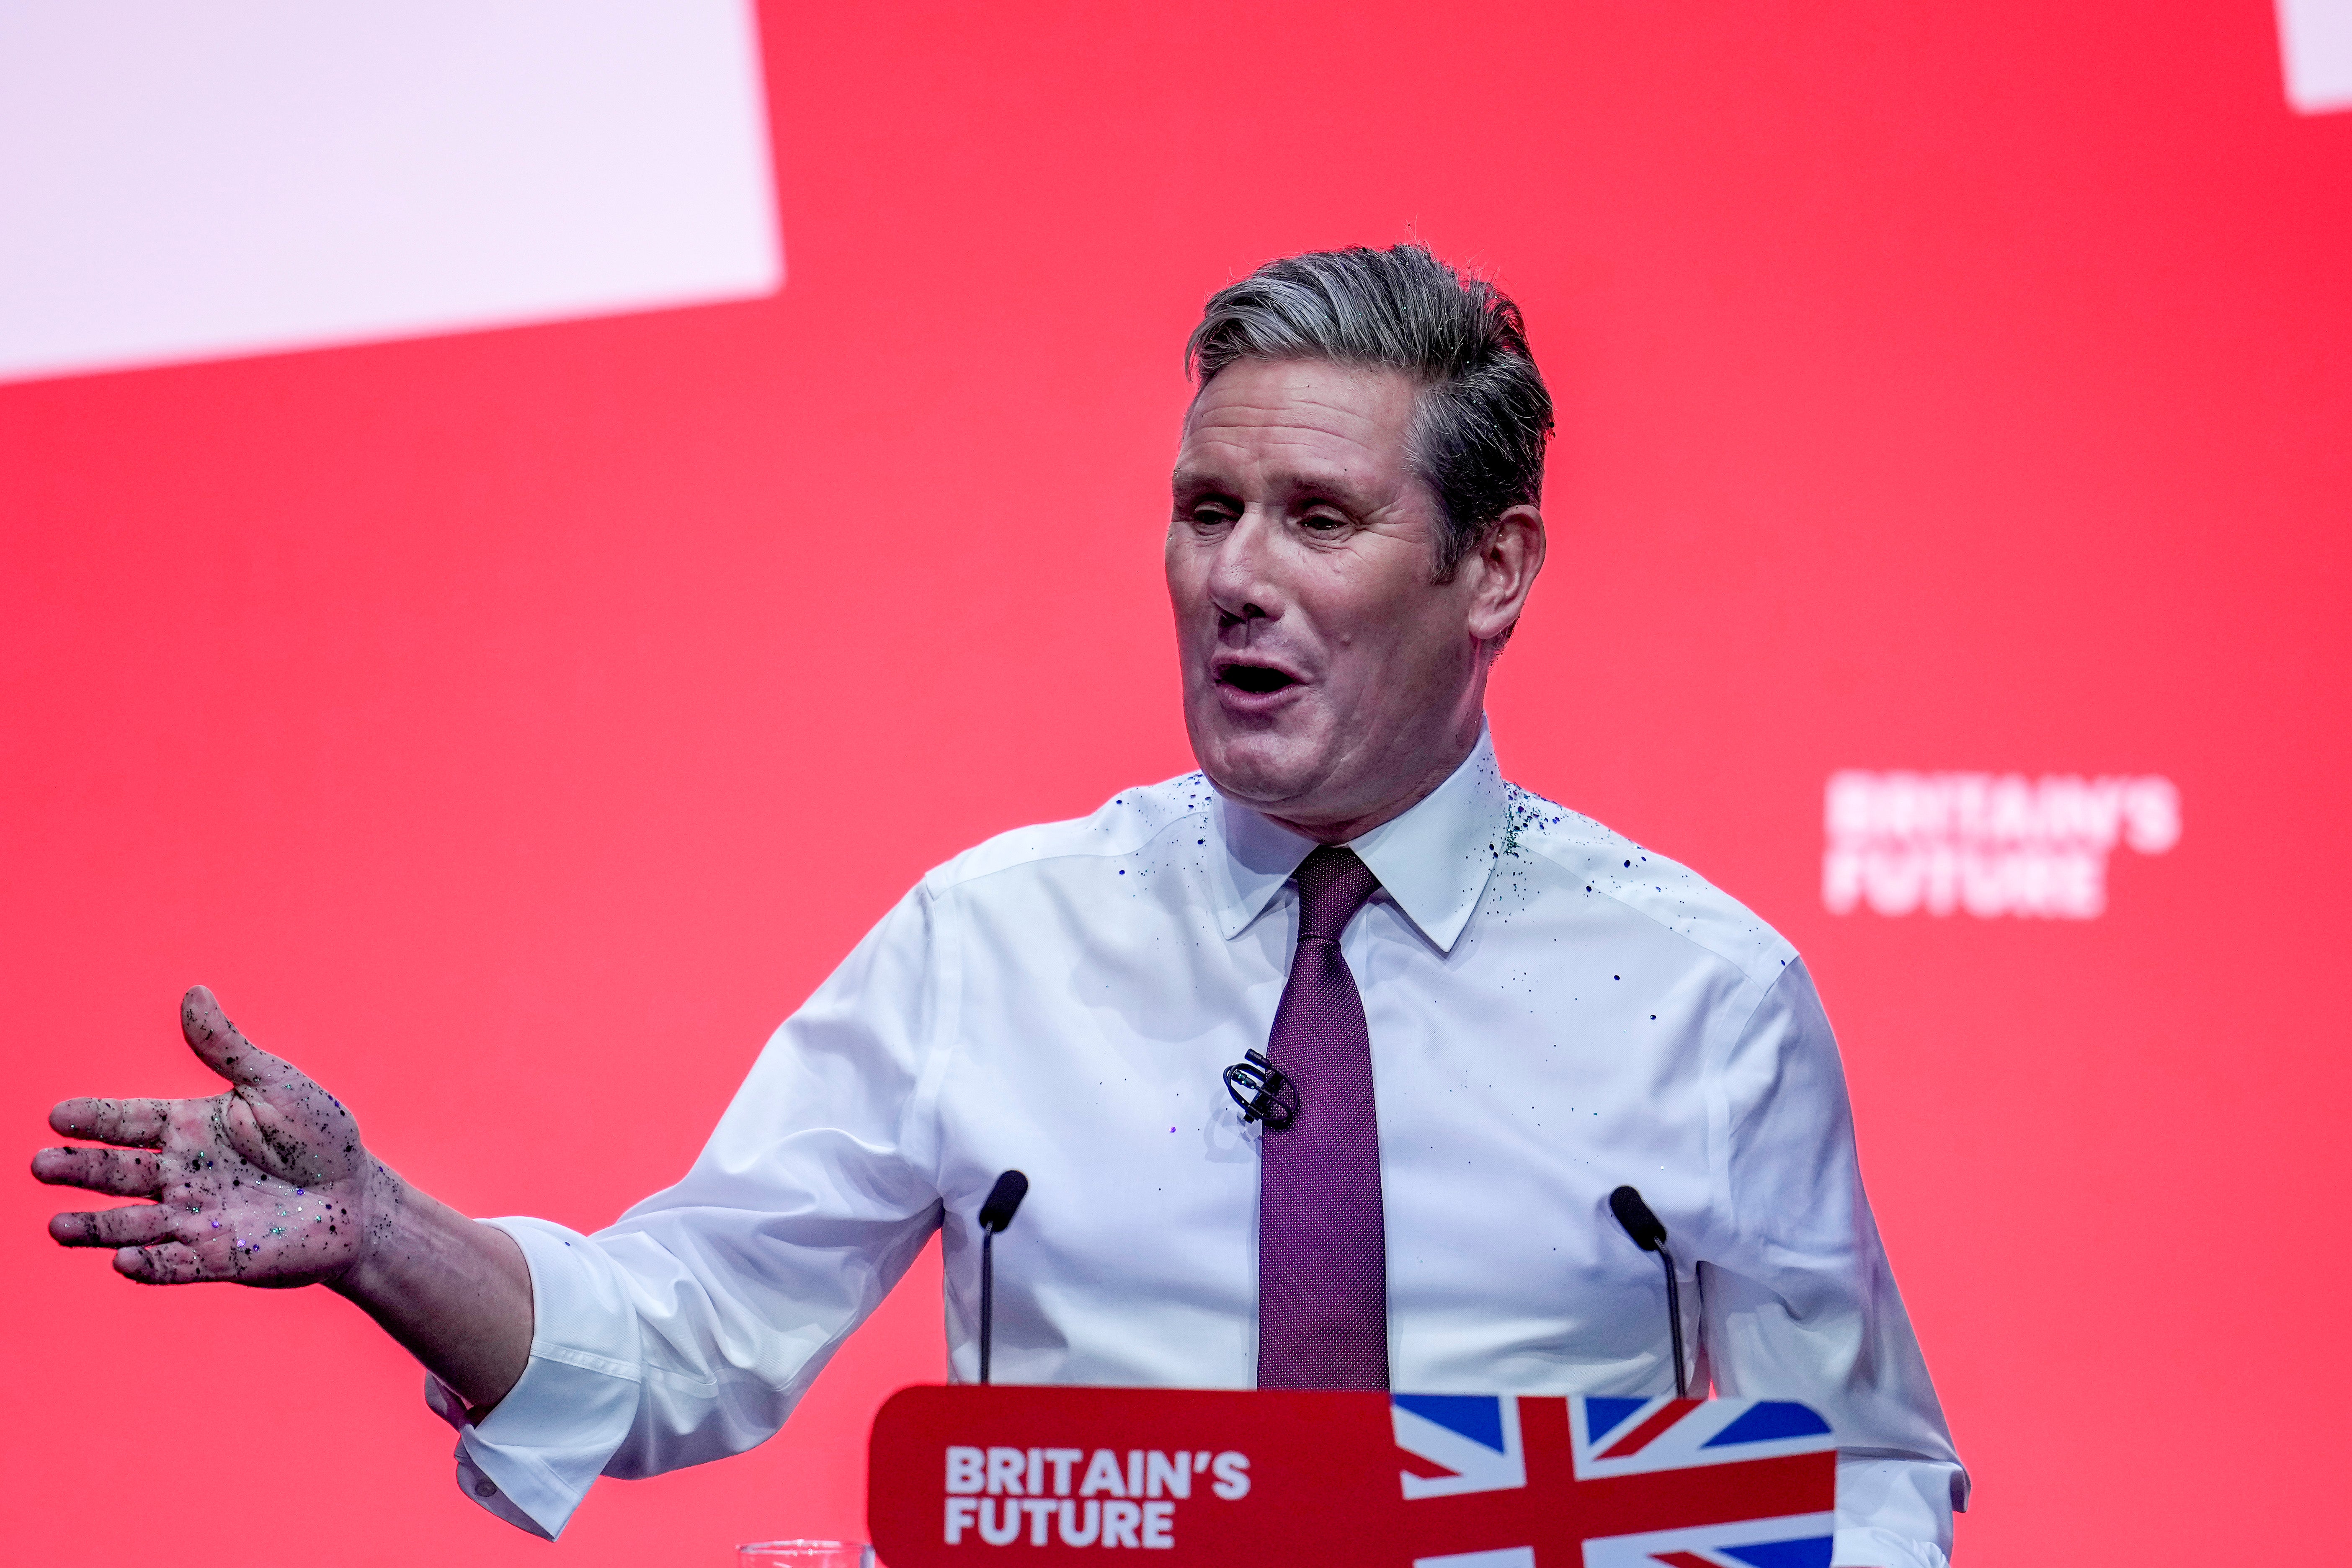 Labour party leader, Sir Keir Starmer delivers the leader’s speech, covered in glitter after a protestor stormed the stage on the third day of the Labour Party conference on 10 October 2023 in Liverpool, England